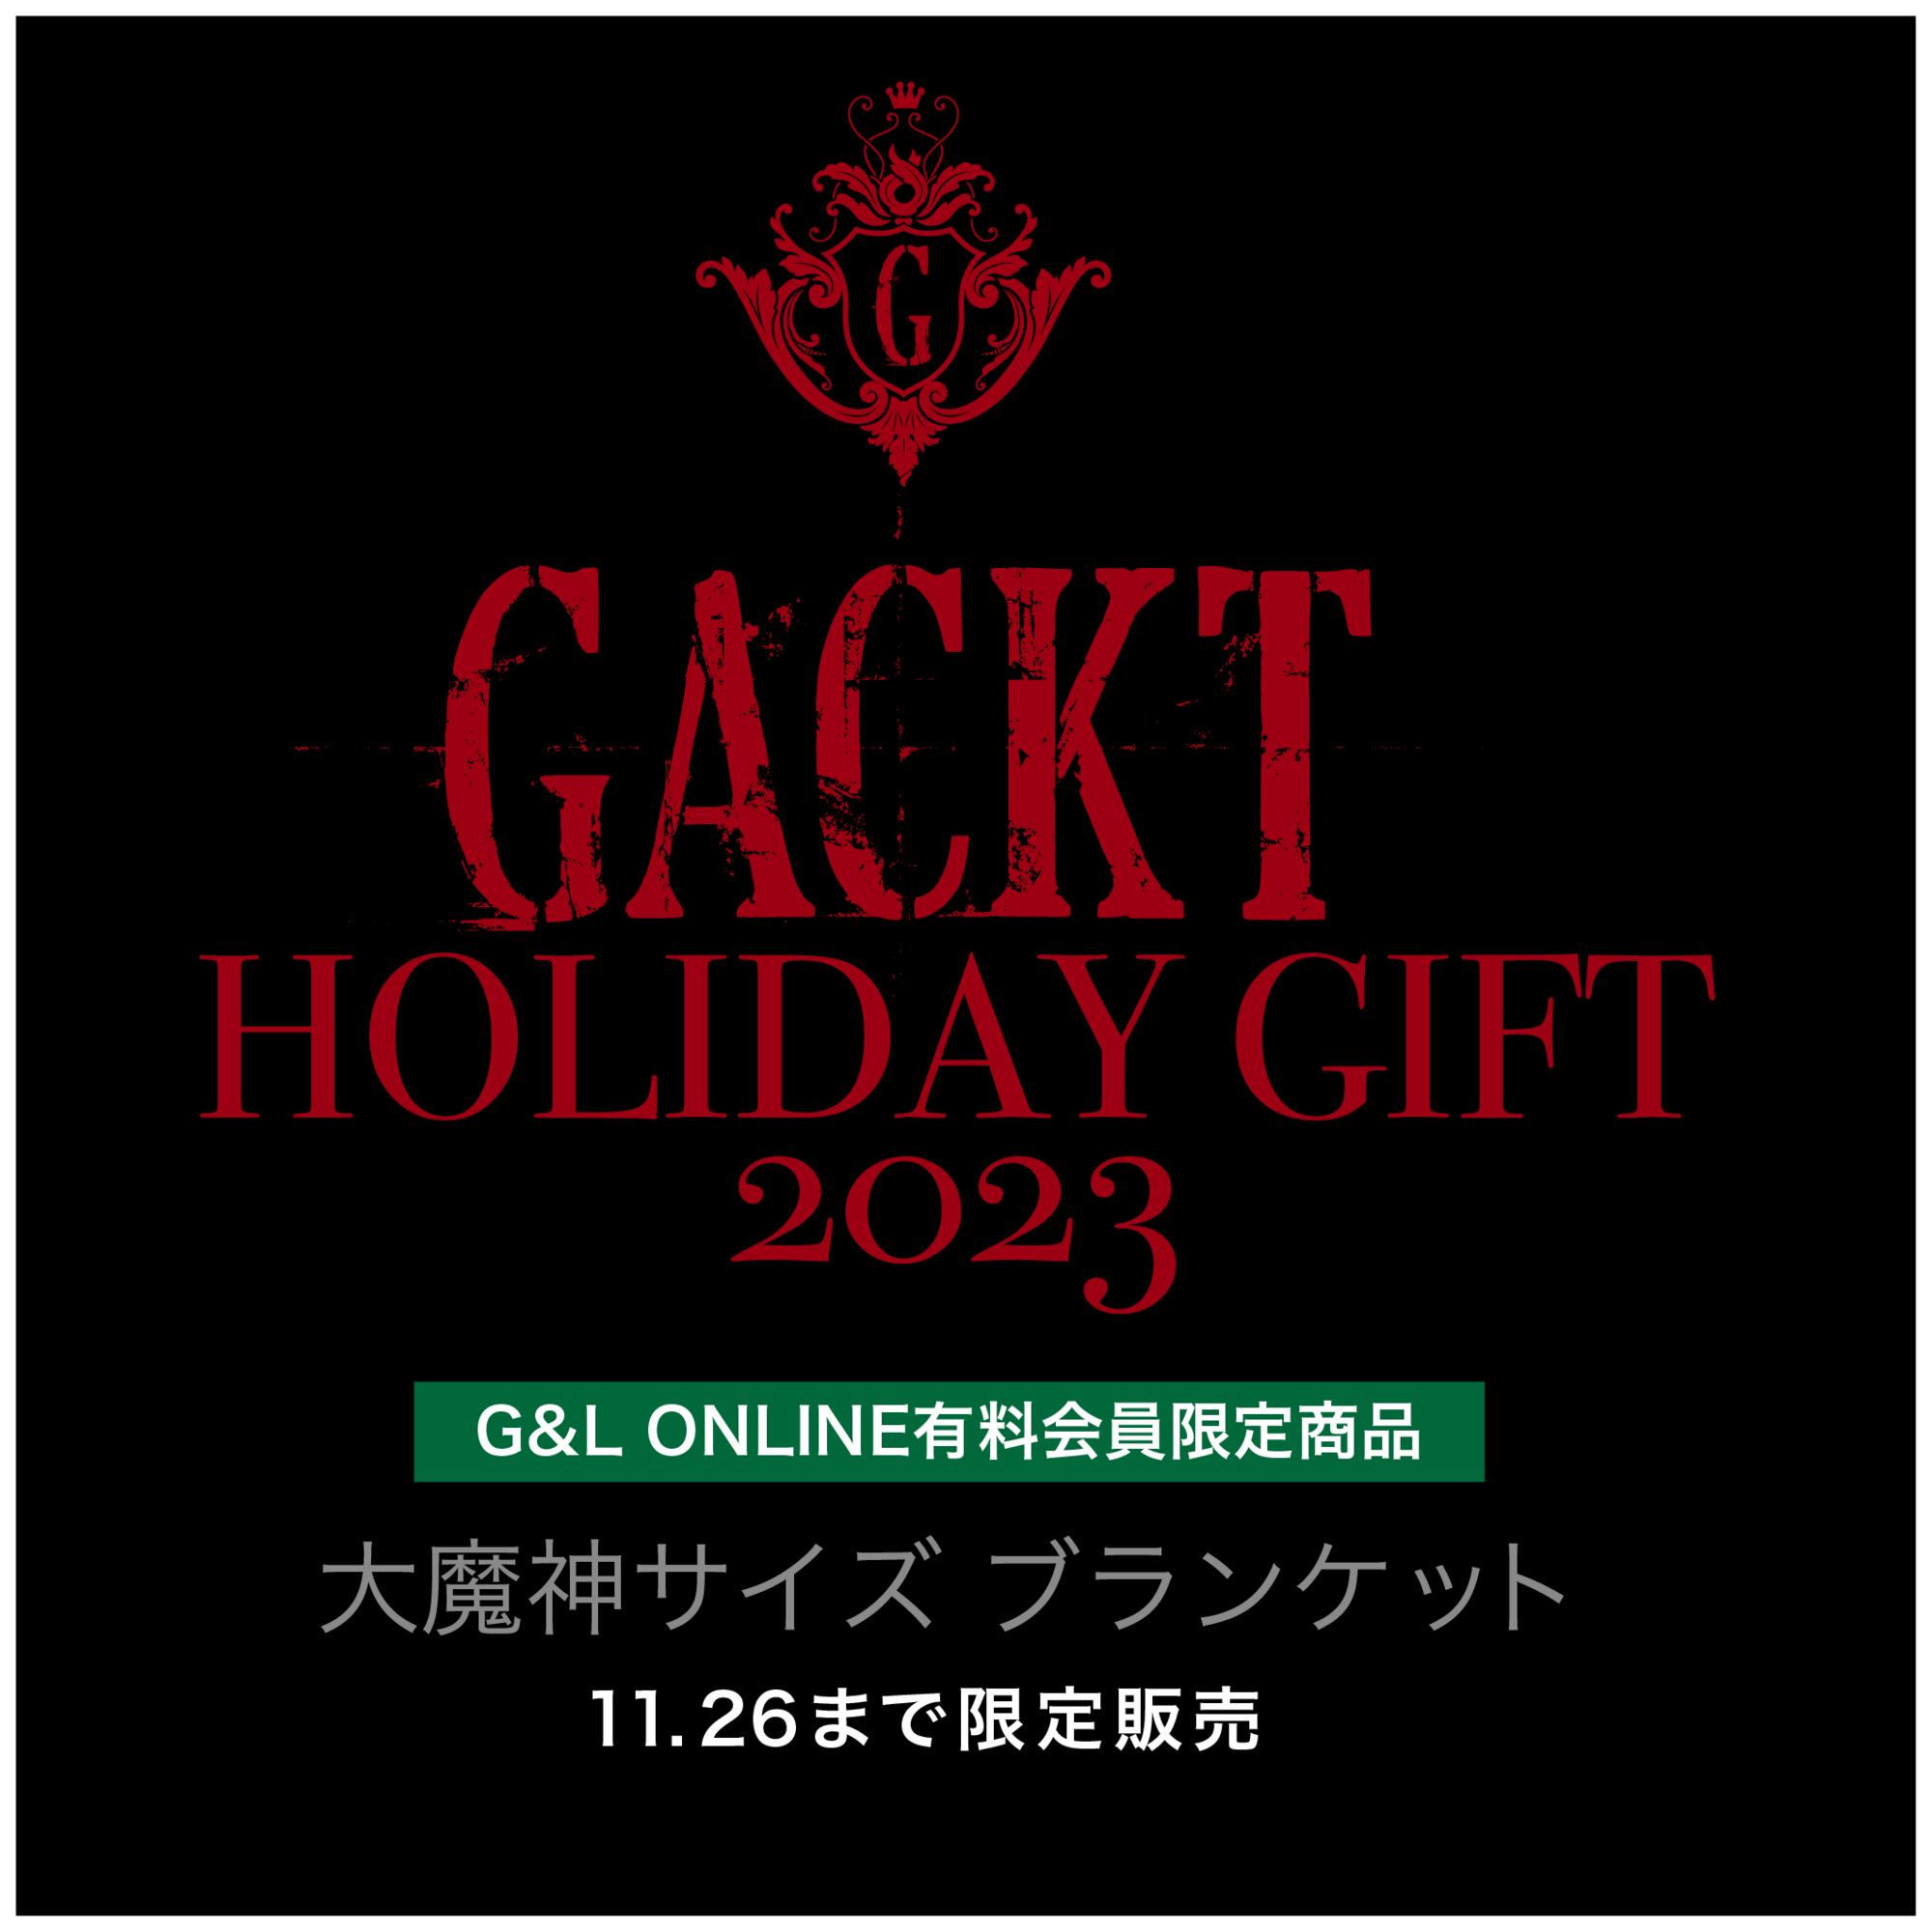 G&L ONLINE先出し 撮り下ろし「等身大ブランケット」 | GACKT OFFICIAL 